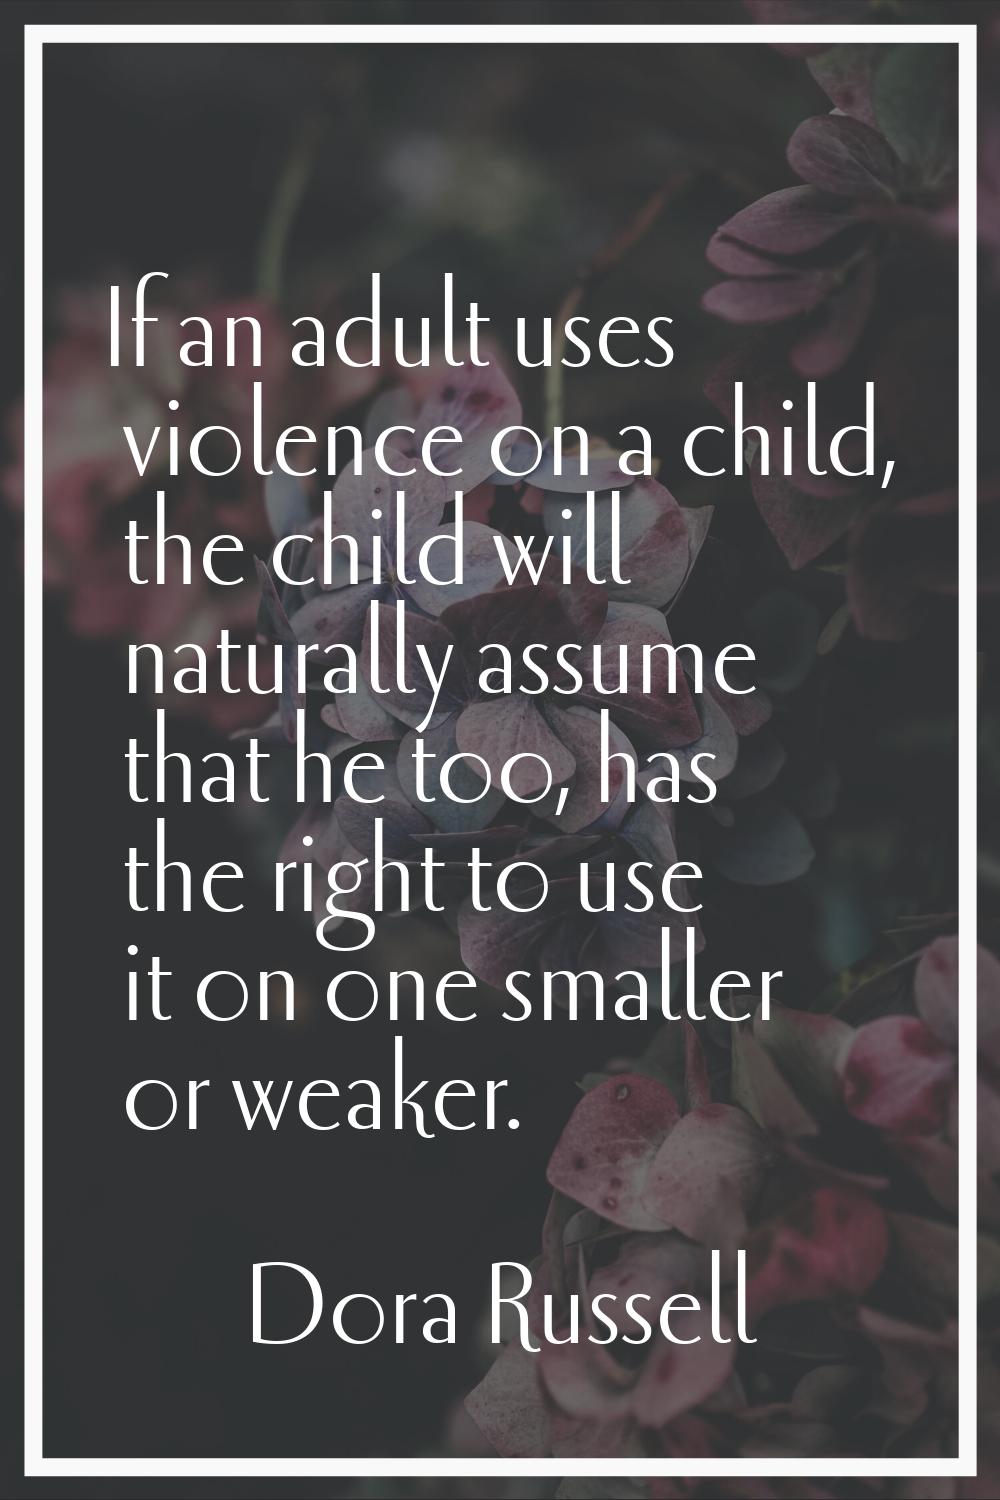 If an adult uses violence on a child, the child will naturally assume that he too, has the right to